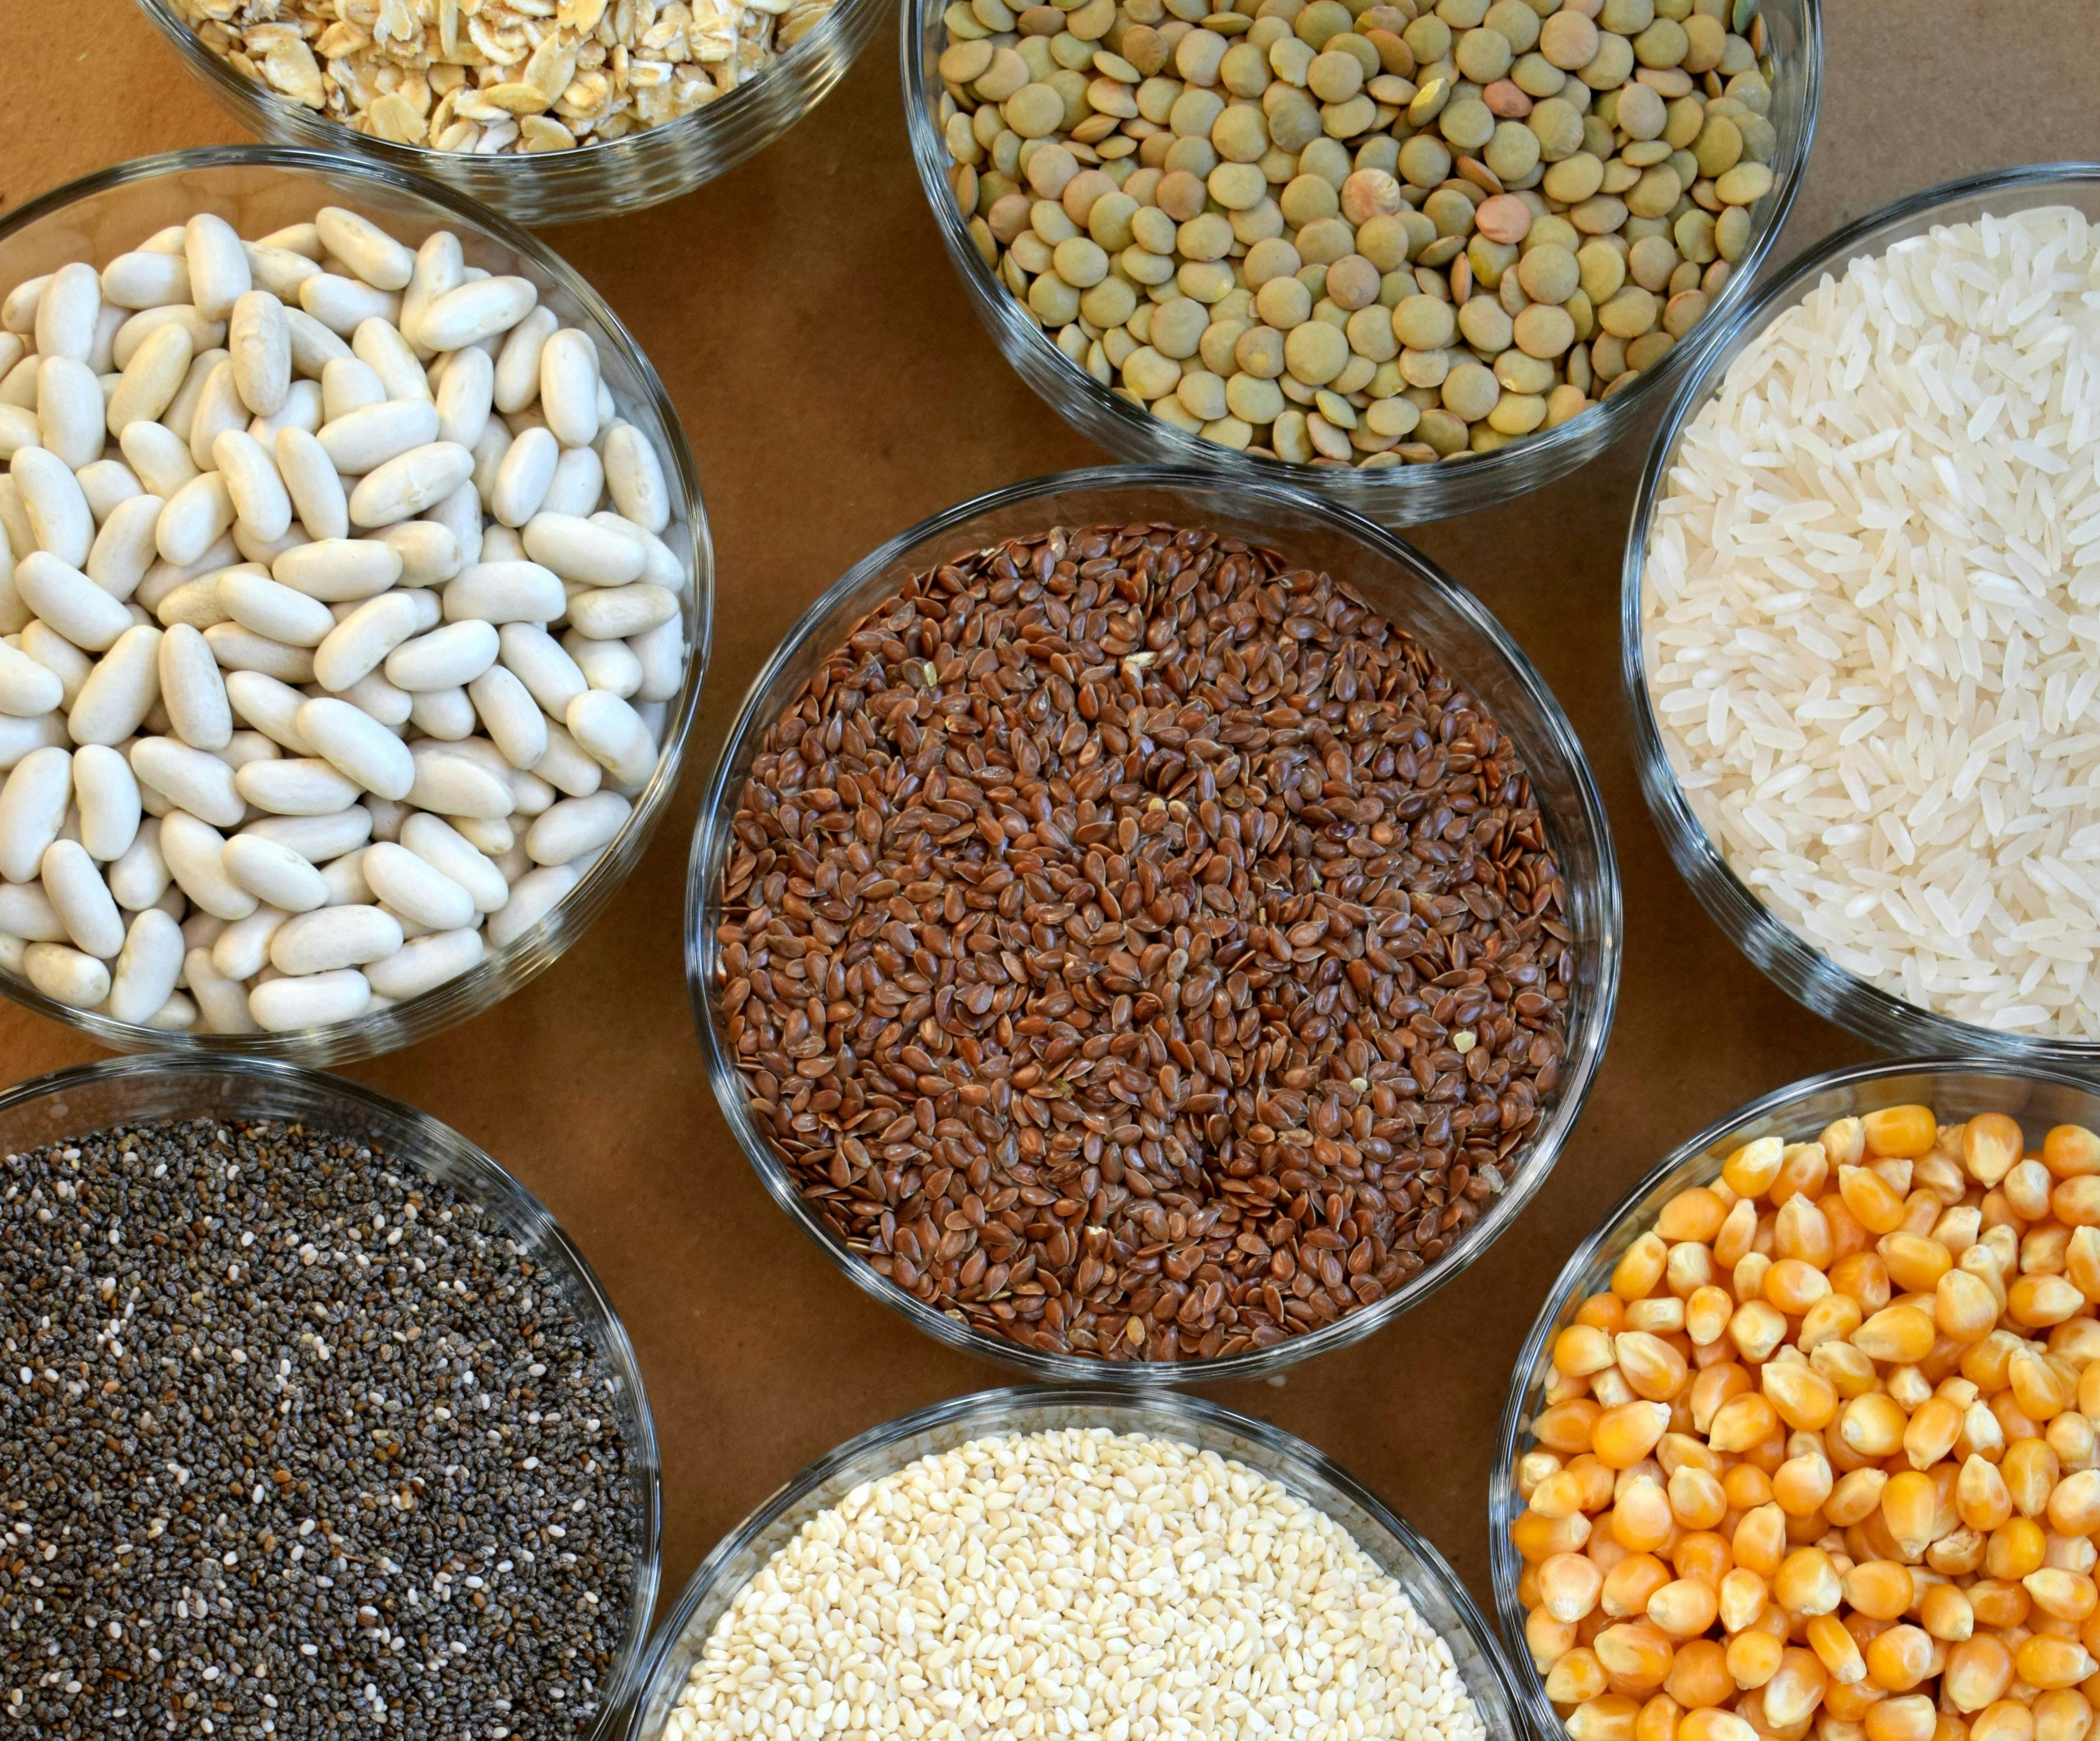 Bowls of different kinds of grains